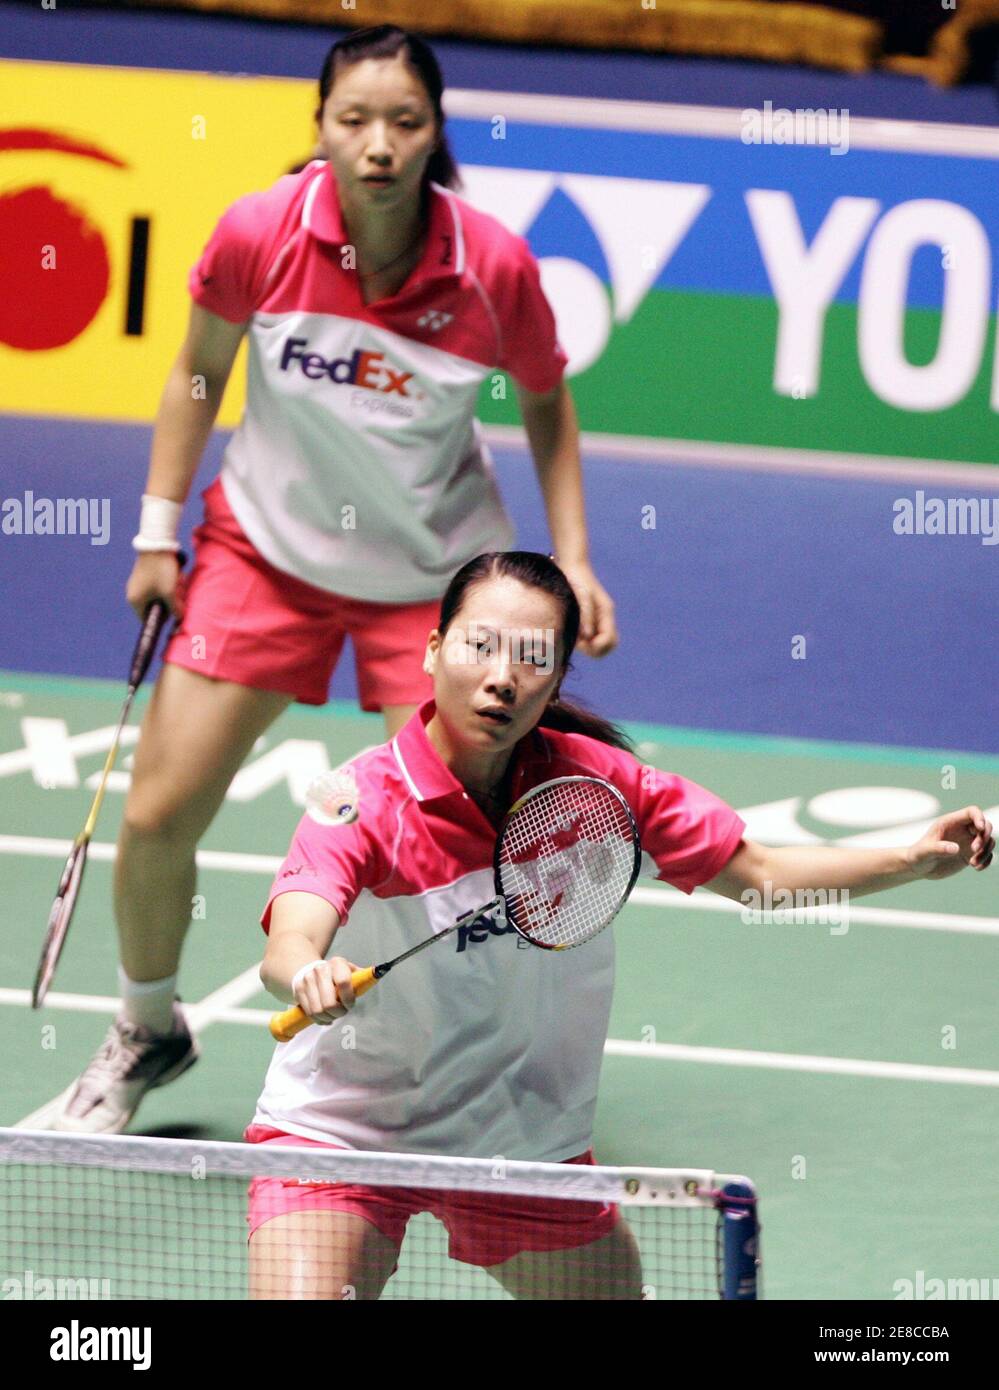 Zhang Jiewen (front) of China returns the shuttlecock as compatriot Yang  Wei looks on during their women's doubles final against Indonesia's Jo  Novita and Gresya Polii at the Yonex Korea Open Badminton